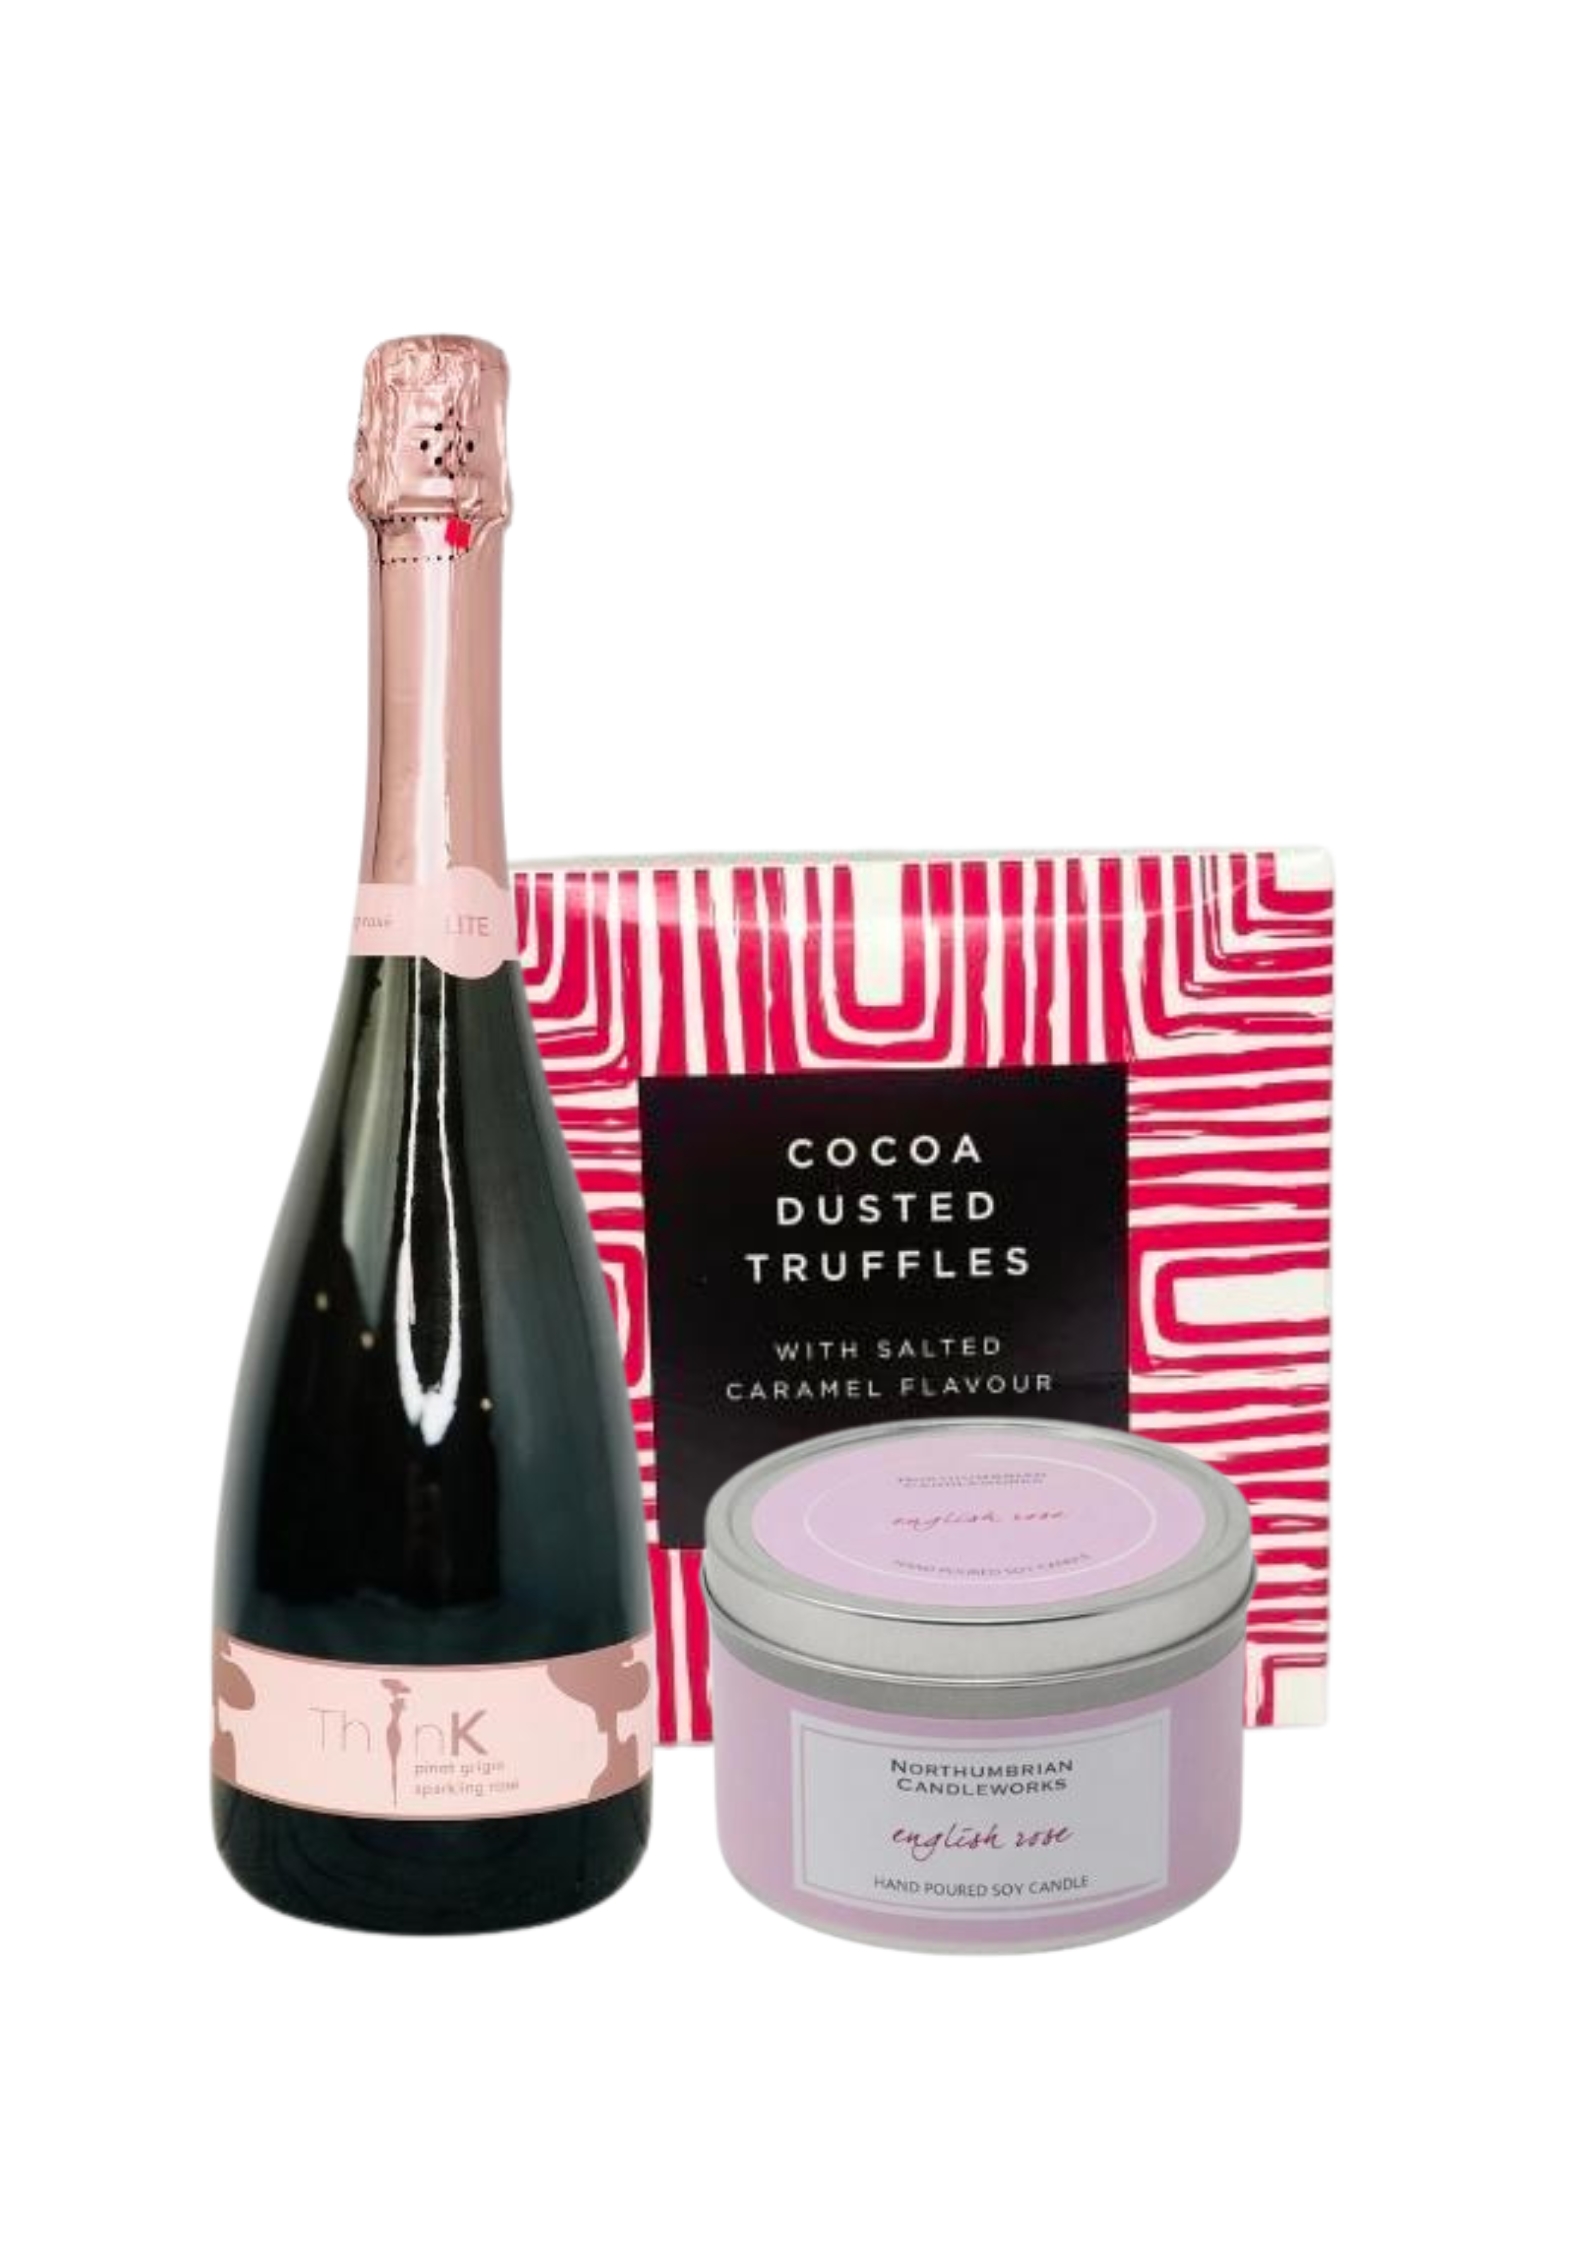 Think Pink Prosecco Chocolates and Scented Candle Gift Set
<p>Order this Think Pink Gift Set to celebrate any occasion and you will not be disappointed.  Containing, a bottle of organic and vegan ThInk Pink Sparkling Rose, a box of Maison Fougere Salted Caramel Truffles together with an eco-friendly Soy Scented Candle beautifully presented in a stylish Gift Box.</p>
<br>
<h2>Gift Delivery Coverage</h2>
<p>Our shop delivers flowers and gifts to the following Liverpool postcodes L1 L2 L3 L4 L5 L6 L7 L8 L11 L12 L13 L14 L15 L16 L17 L18 L19 L24 L25 L26 L27 L36 L70 ONLY.  If your order is for an area outside unfortunately we cannot process your order because of the difference in stock at other florists.</p>
<br>
<h2>Alcohol Gifts</h2>
<p>As a licensed florist, we are able to supply alcoholic drinks either as a gift on their own or with flowers. We have carefully selected a range that we know you will love either as a gift in itself or to provide that extra bit of celebratory luxury to a floral gift.</p>
<p>The bottle of Sparkling Think Pink Rose is made here in Liverpool and is paired with a box of 170g Maison Fougere Salted Caramel Chocolate Truffles in a stylish gift box together with and a Northumbrian Scented Soy Candle in a stylish tin.</p>
<p>Have this giftset delivered to someone special to celebrate as an alternative to having flowers delivered, or have it delivered with your flowers to really celebrate!</p>
<p>The Pink Sparkling Wine is brewed in Liverpool by ThInk Wine Group.</p>
<br>
<h2>Online Gift Ordering | Online Gift Delivery</h2>
<p>Through this website you can order 24 hours, Booker Gifts and Gifts Liverpool have put together this carefully selected range of Flowers, Gifts and Finishing Touches to make Gift ordering as easy as possible. This means even if you do not live in Liverpool we make it easy for you to see what you are getting when buying for delivery in Liverpool.</p>
<br>
<h2>Liverpool Flower and Gift Delivery</h2>
<p>We are open 7 days a week and offer advanced booking flower delivery, same-day flower delivery, Guaranteed AM Flower Delivery and also offer Sunday Flower Delivery.</p>
<p>Our florists Deliver in Liverpool and can provide flowers for you in Liverpool, Merseyside. And through our network of florists can organise flower deliveries for you nationwide.</p>
<br>
<h2>Beautiful Gifts Delivered | Best Florist in Liverpool</h2>
<p>Having been nominated the Best Florist in Liverpool by the independent Three Best Rated for the 5th year running you can feel secure with us</p>
<p>You can trust Booker Gifts and Gifts to deliver the very best for you.</p>
<br>
<h2>5 Star Google Review</h2>
<p><em>So Pleased with the product and service received. I am working away currently, so ordered online, and after my own misunderstanding with online payment, I contacted the florist directly to query. Gemma was very prompt and helpful, and my flowers were arranged easily. They arrived this morning and were as impactful as the pictures on the website, and the quality of the flowers and the arrangement were excellent. Great Work! David Welsh</em></p>
<br>